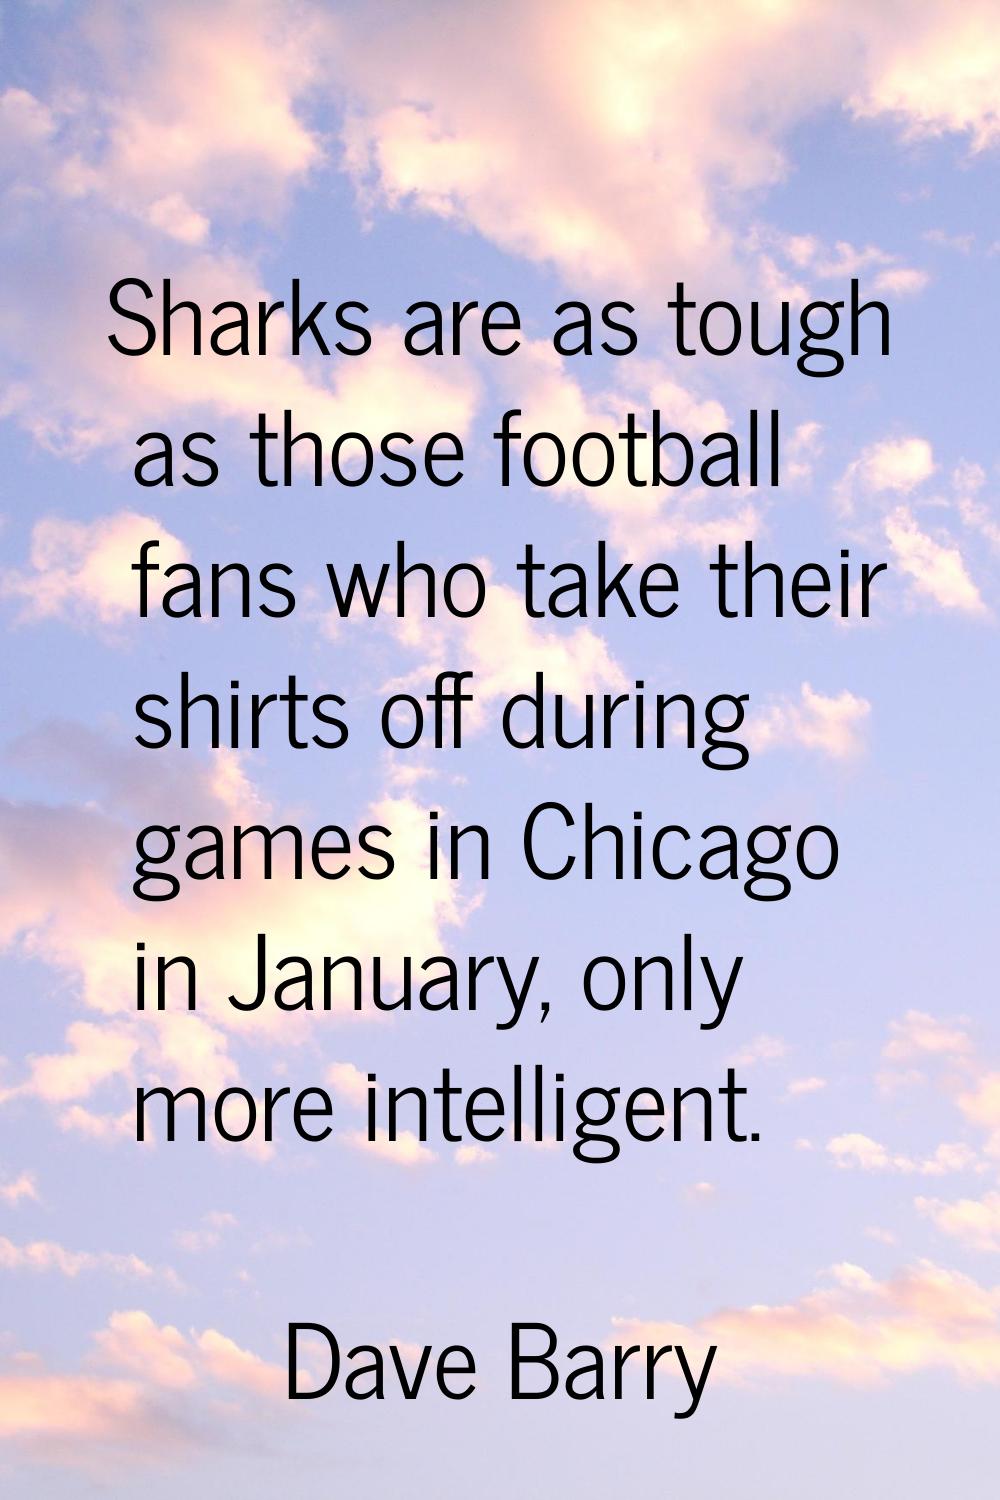 Sharks are as tough as those football fans who take their shirts off during games in Chicago in Jan